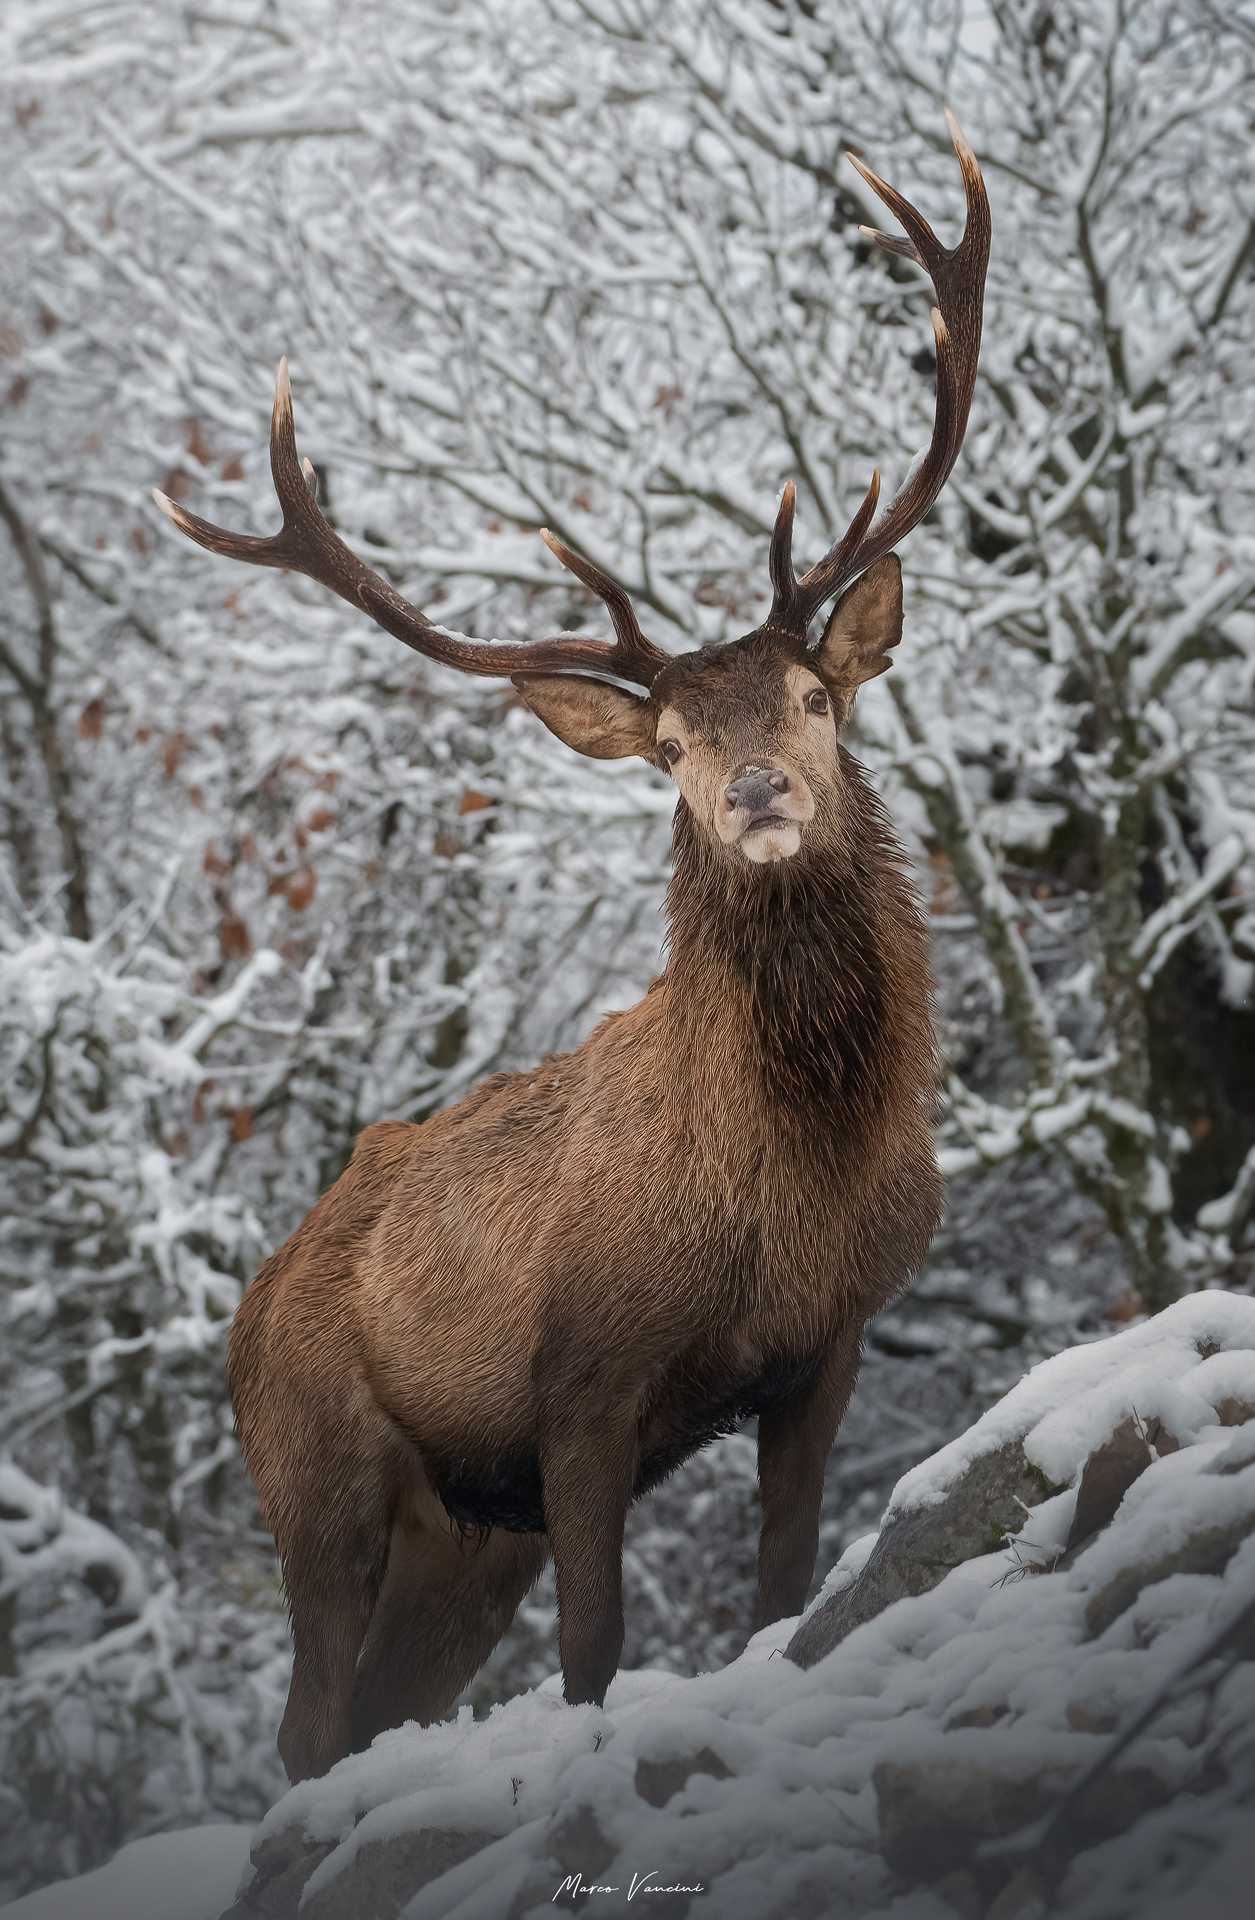 In the snowy woods, the noble deer ...